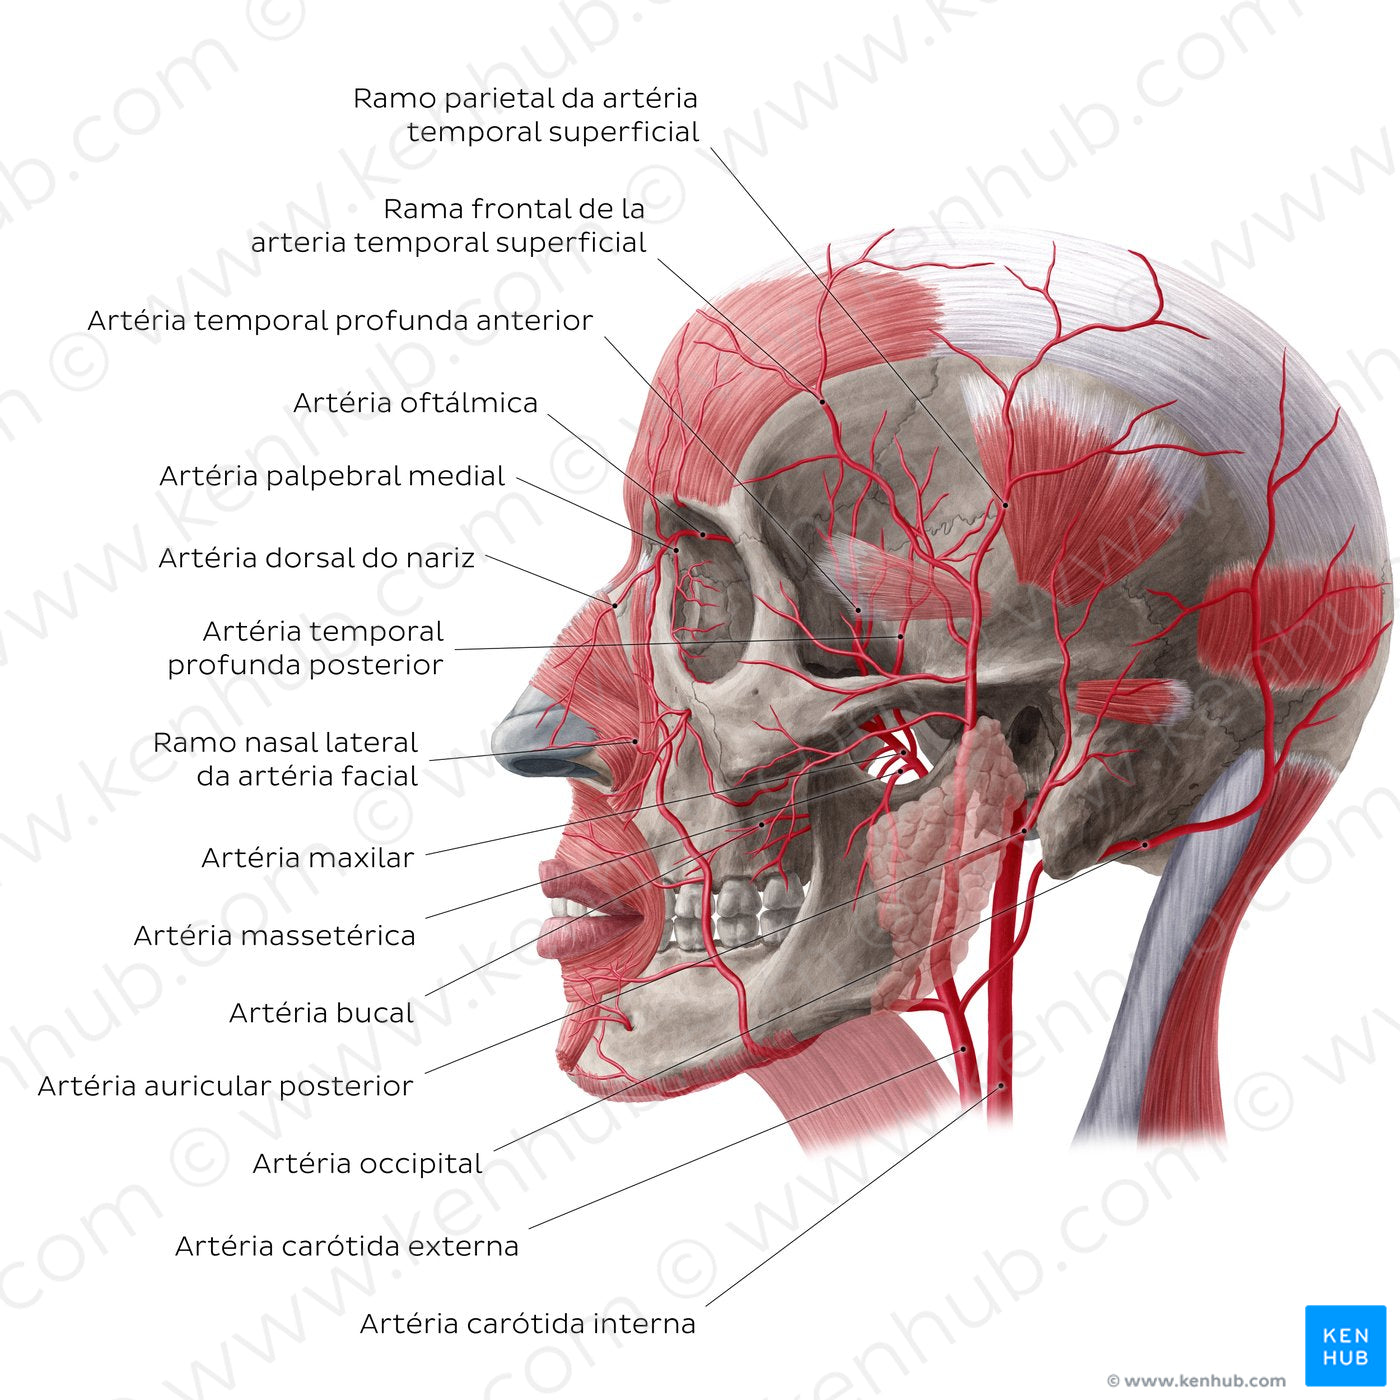 Arteries of face and scalp (Lateral view) (Portuguese)